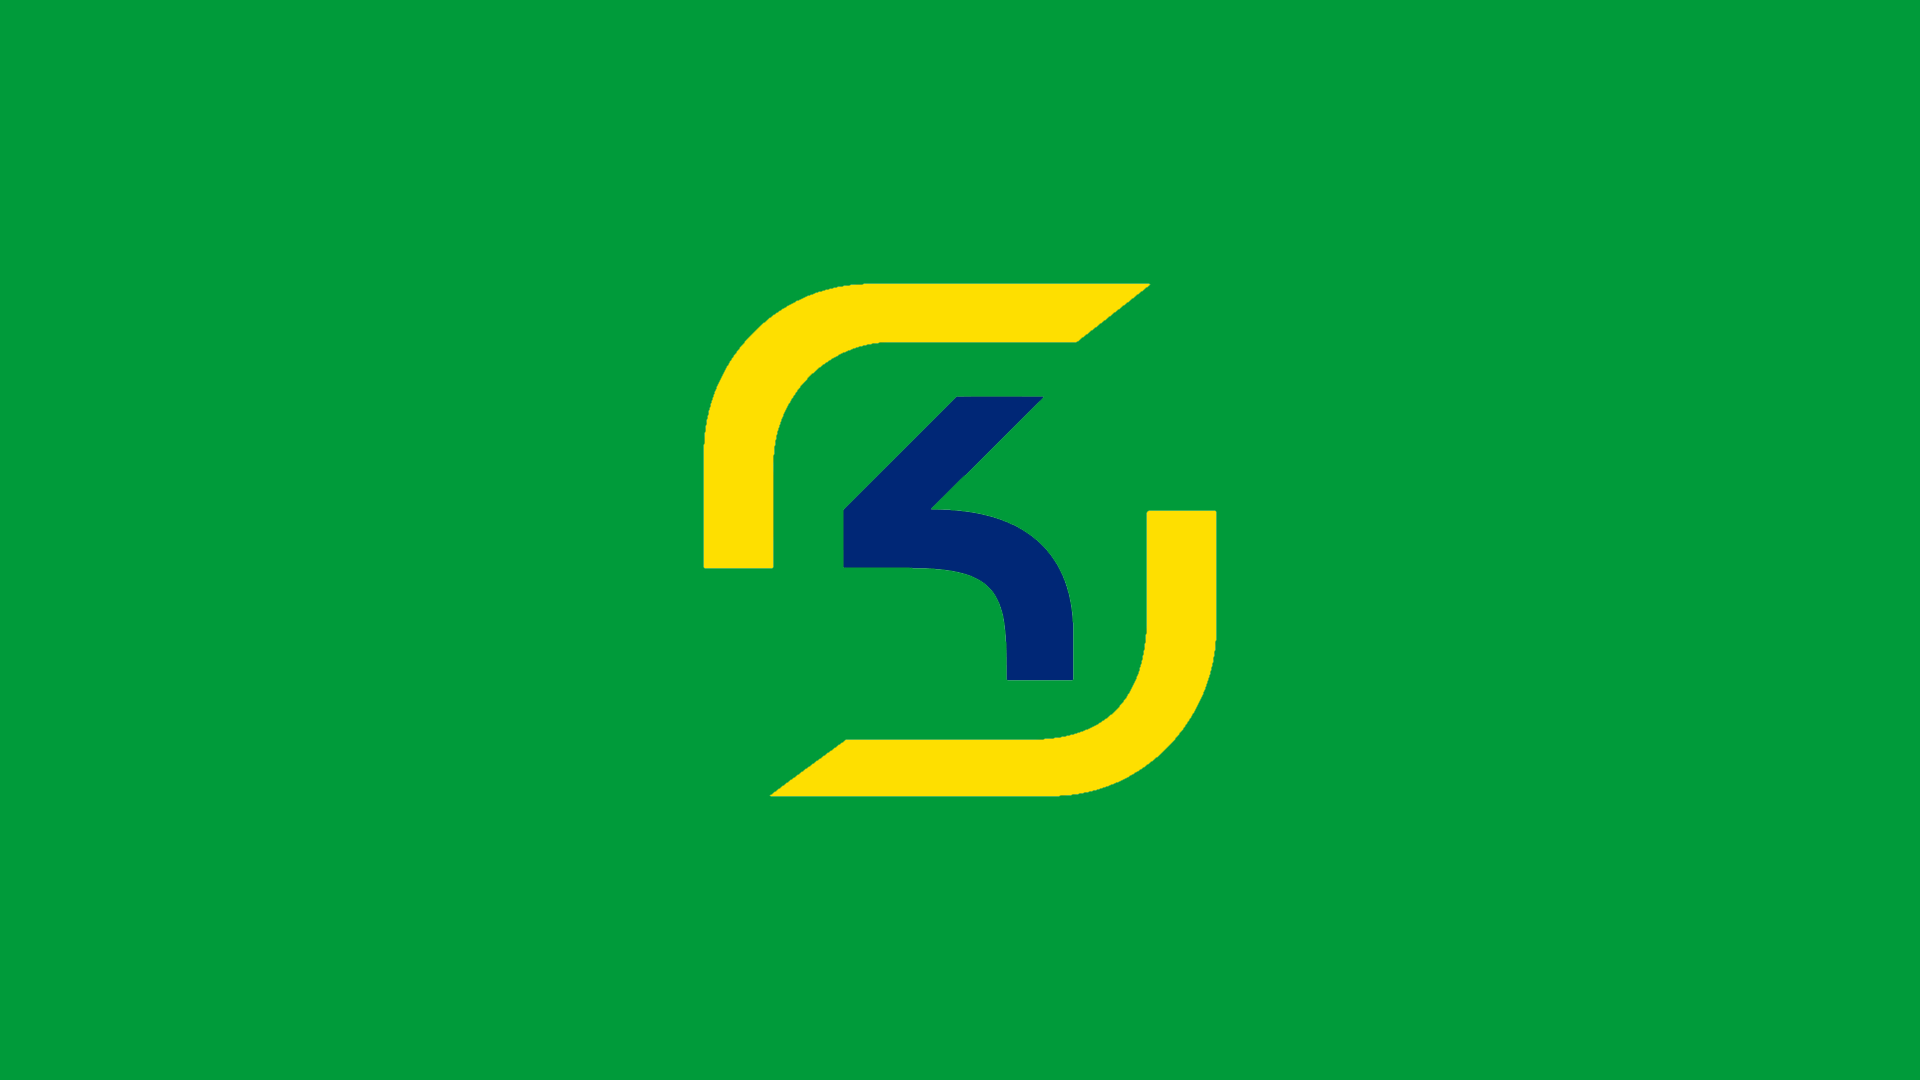 A simple SK Gaming wallpaper- Inspired by the Brazilian flag. best